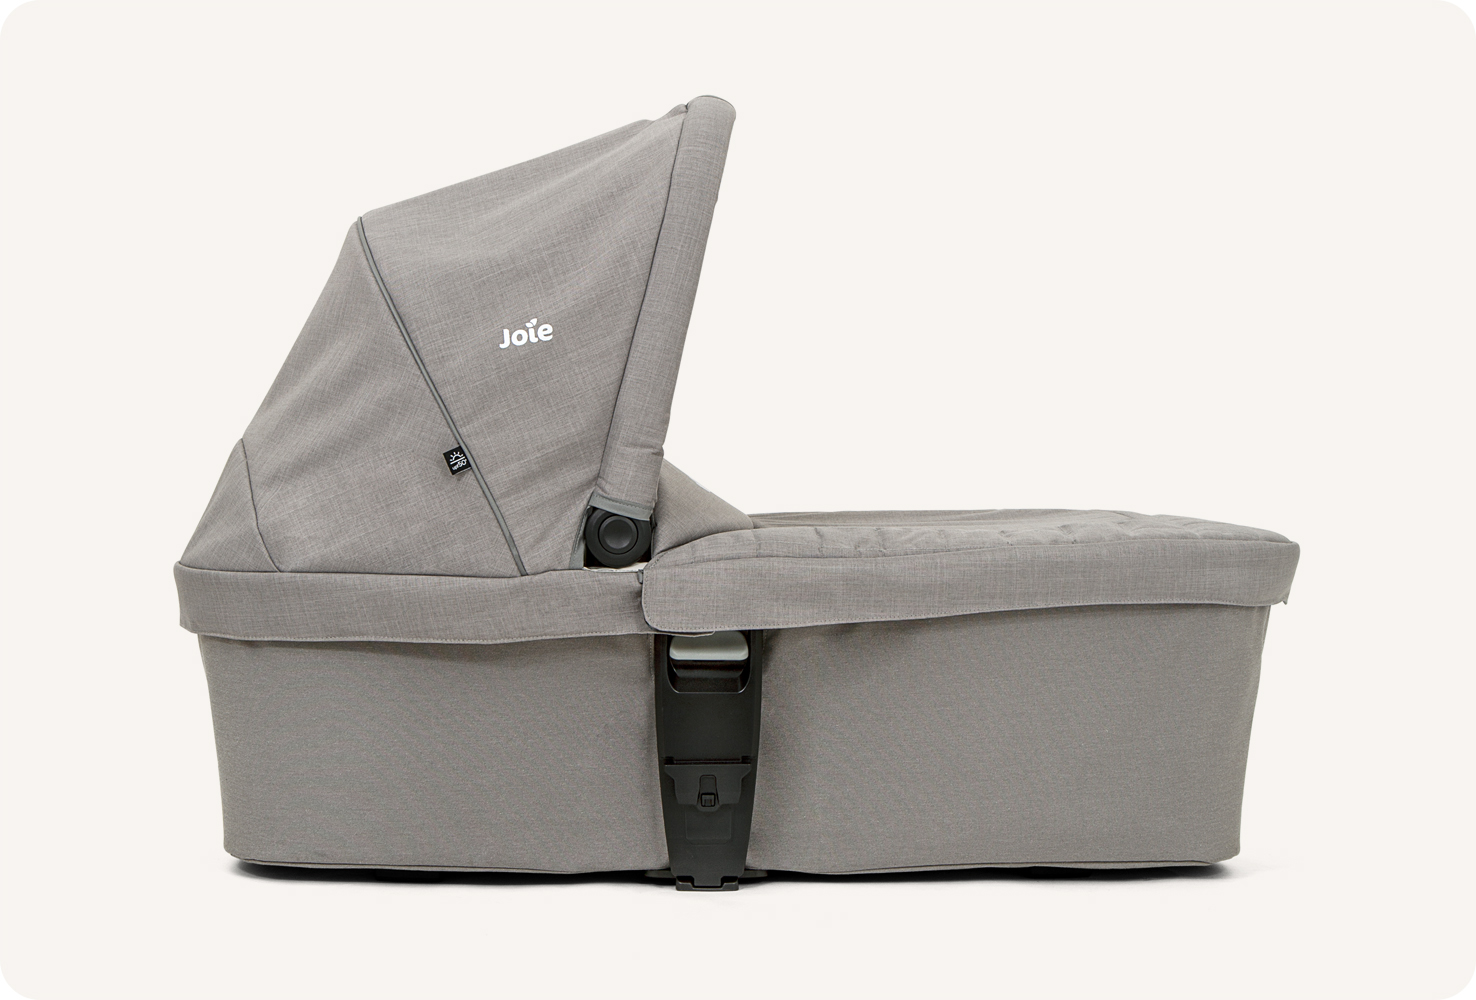   Joie chrome carry cot in light gray in profile. 